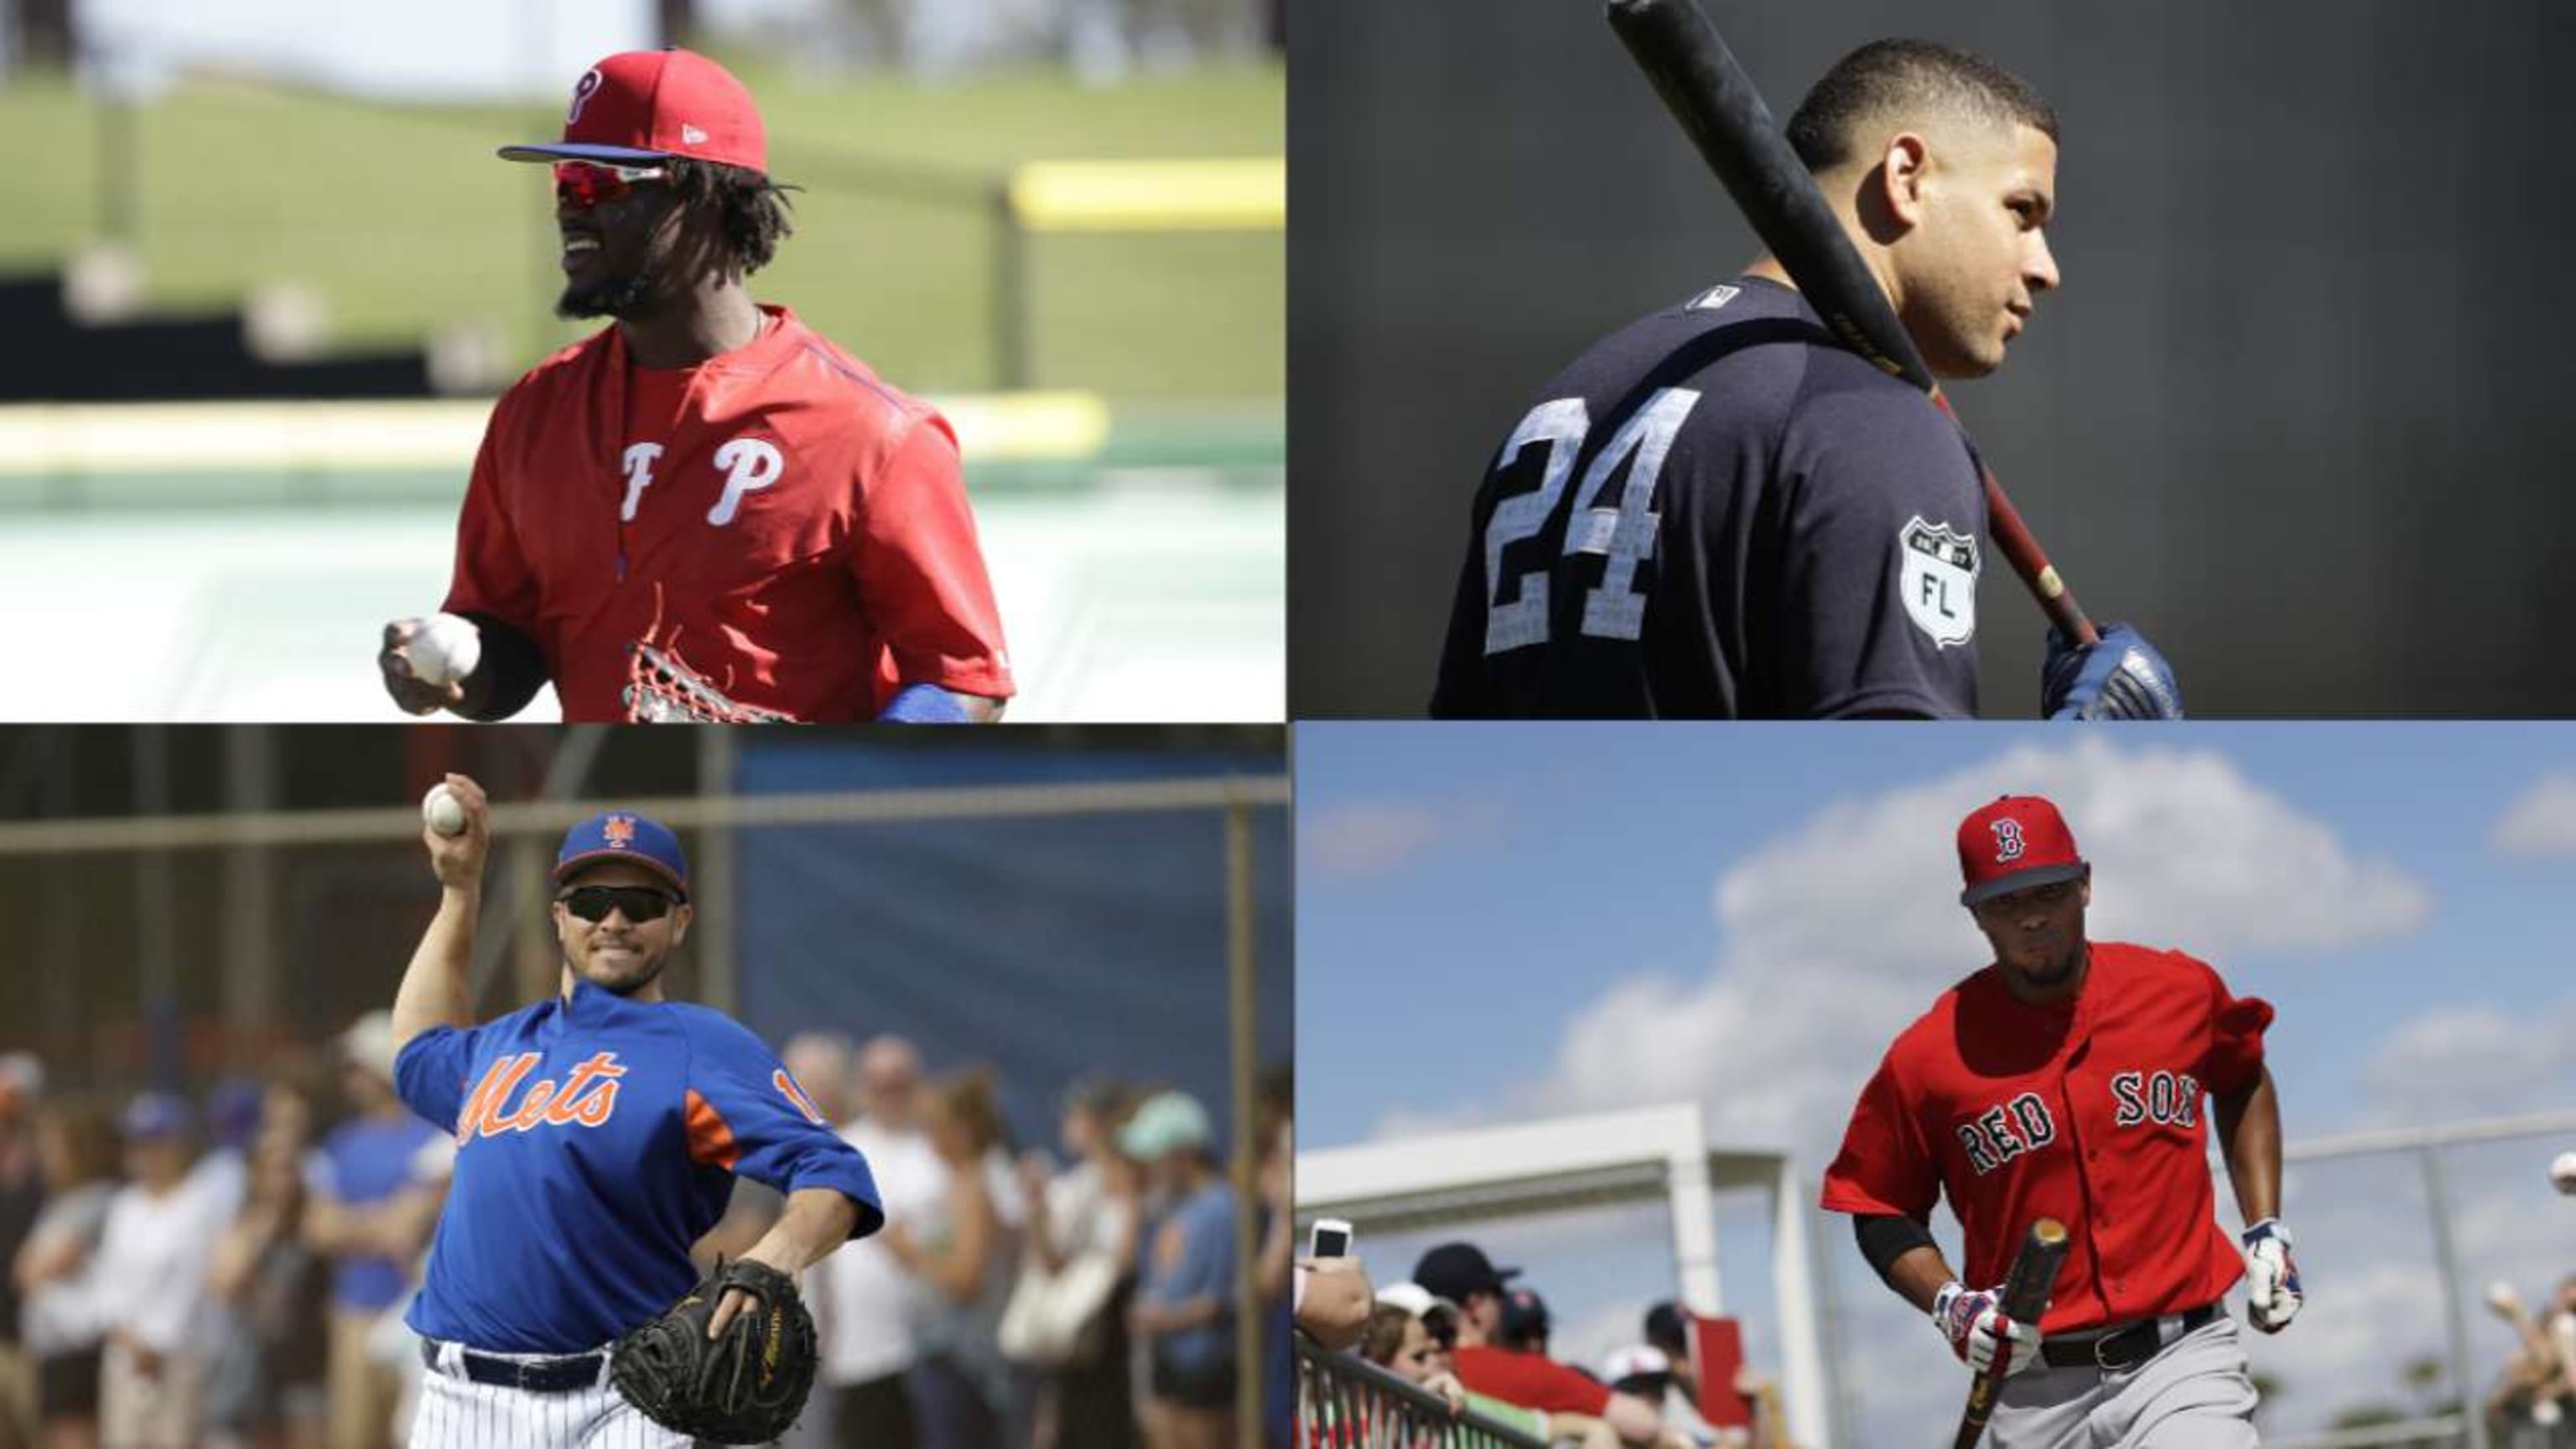 MLB returns with Spring Training rollout